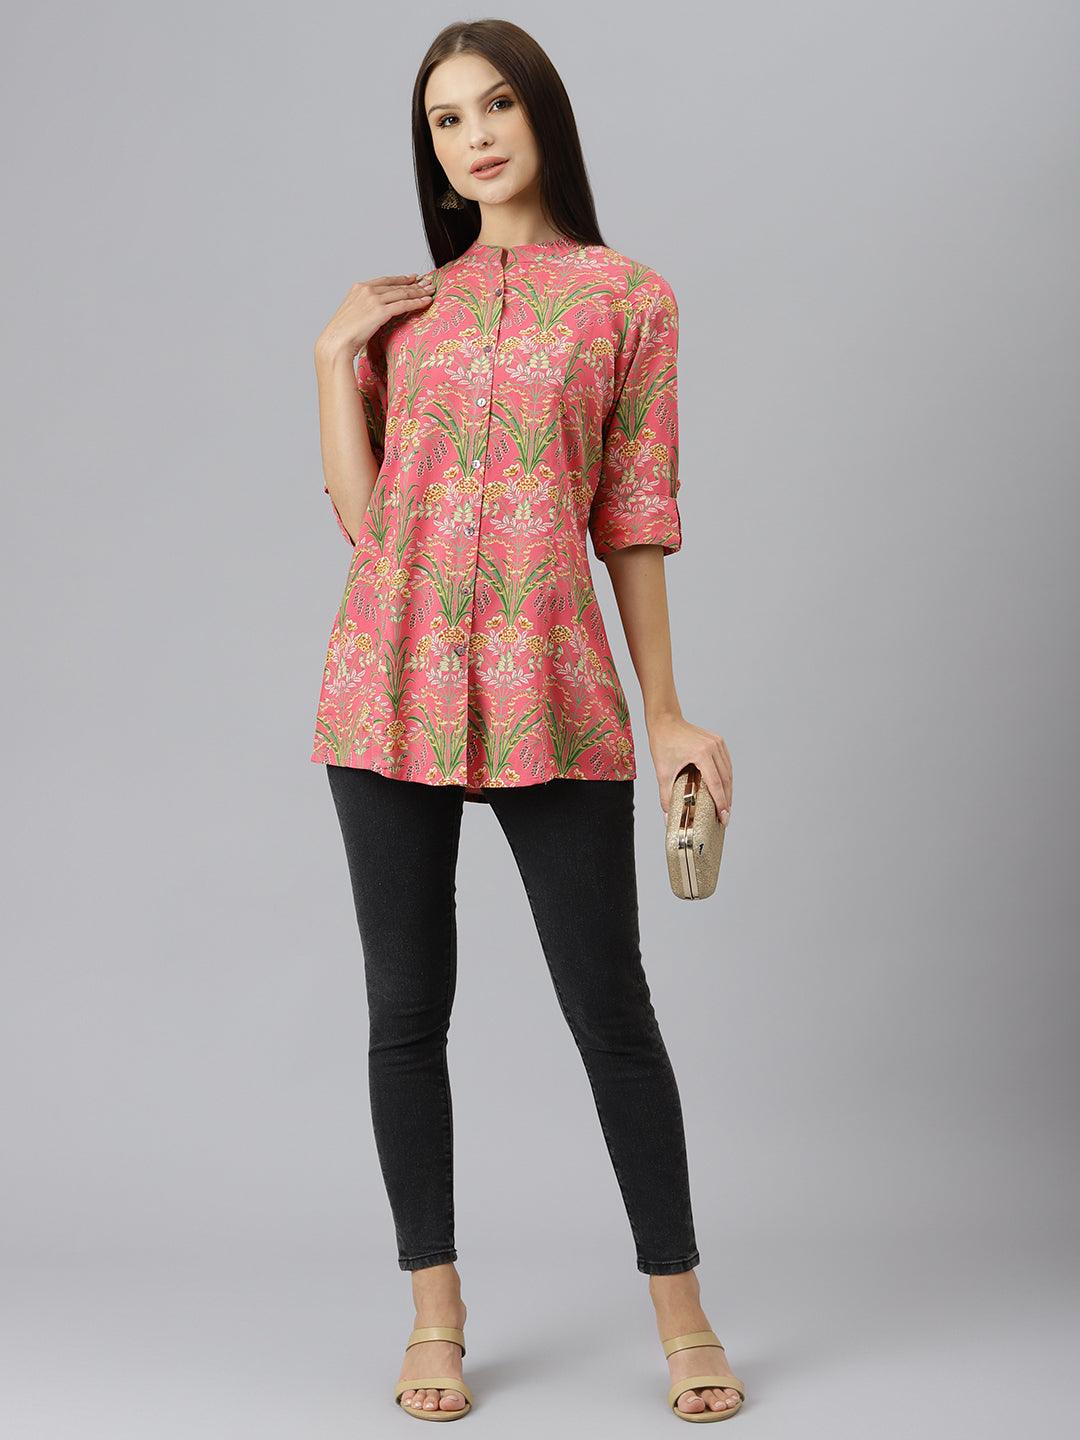 Dark Pink Floral Rayon A-line Shirts Style Top